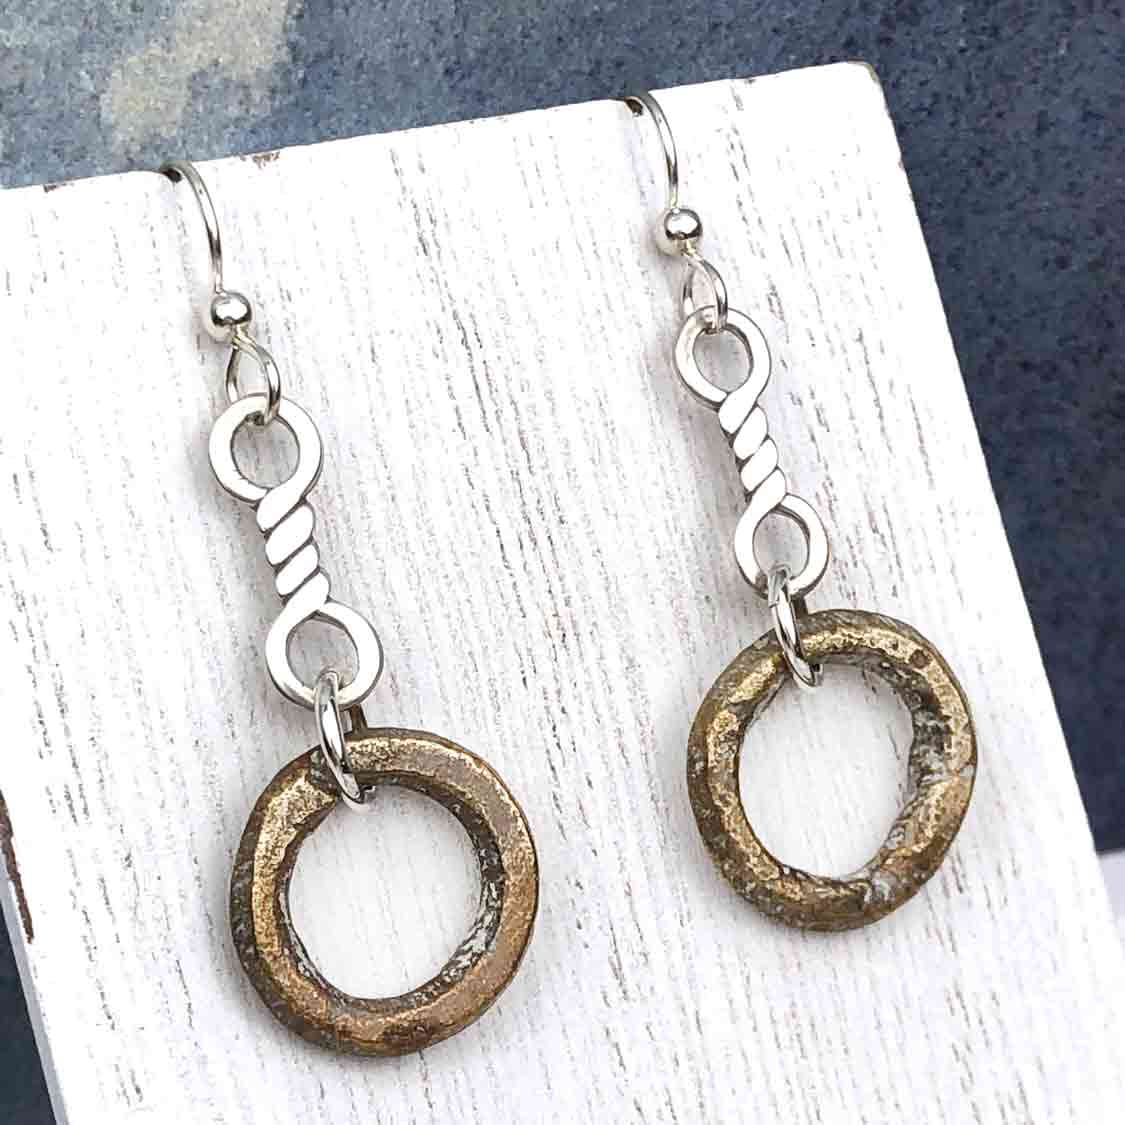 Light Thick Bronze Celtic Ring Money Earrings with Twist Charms 